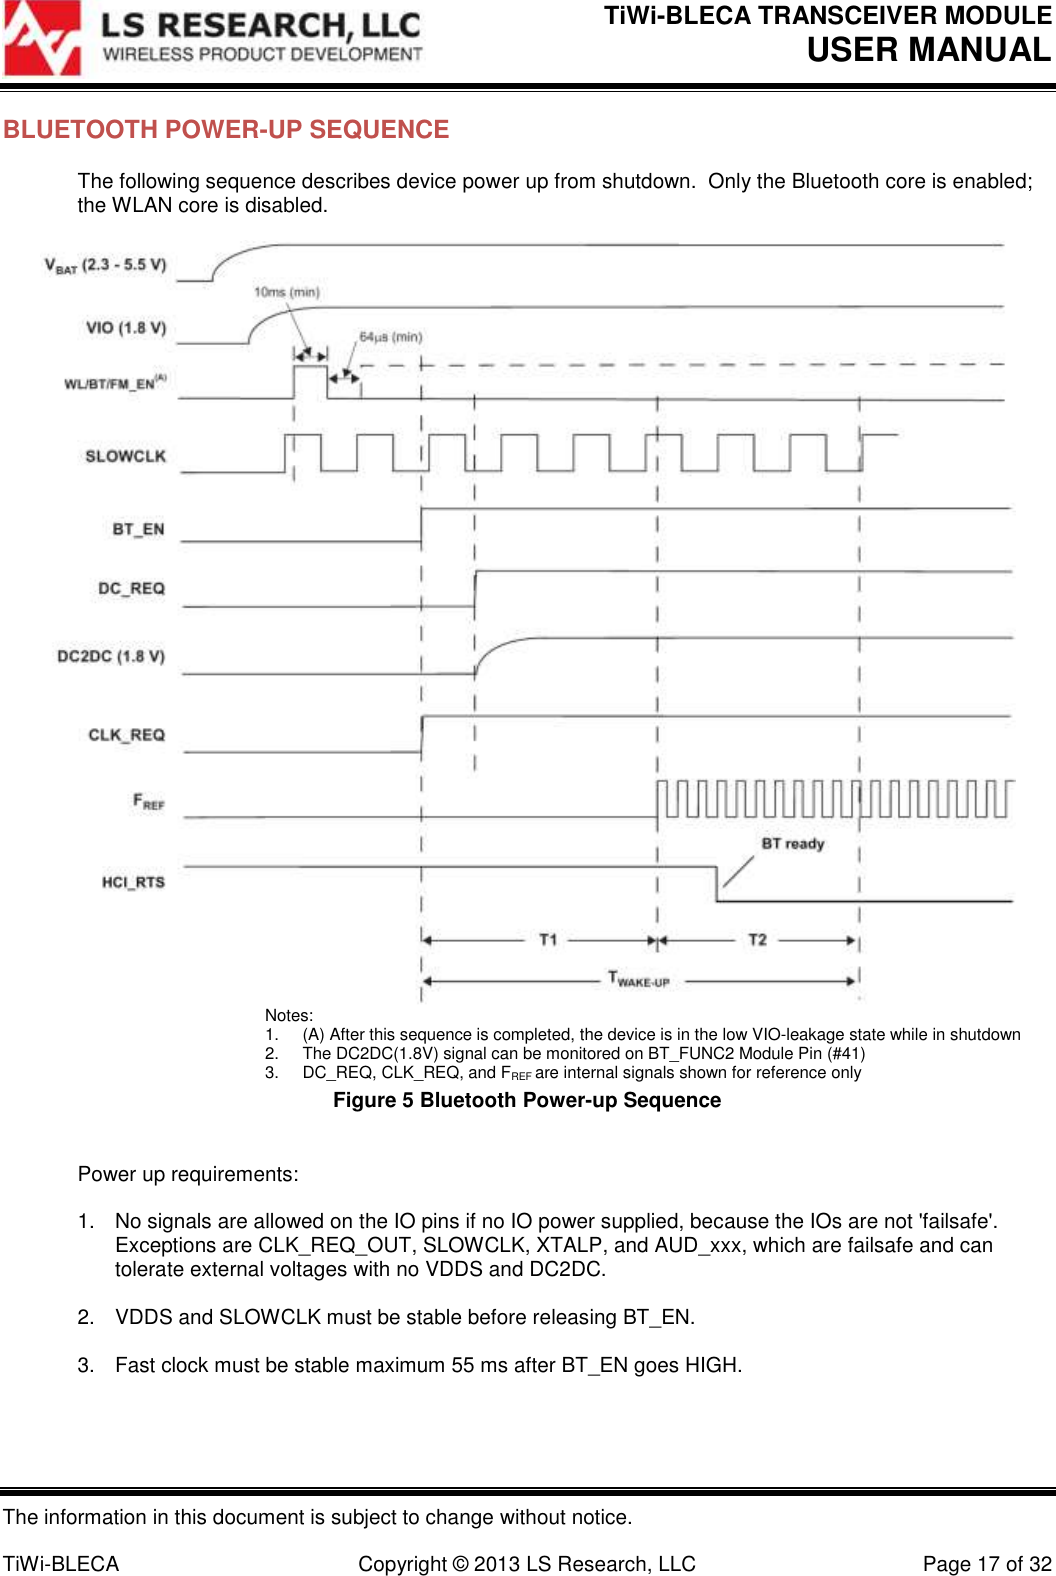 TiWi-BLECA TRANSCEIVER MODULE USER MANUAL   The information in this document is subject to change without notice.  TiWi-BLECA  Copyright © 2013 LS Research, LLC  Page 17 of 32 BLUETOOTH POWER-UP SEQUENCE The following sequence describes device power up from shutdown.  Only the Bluetooth core is enabled; the WLAN core is disabled.   Notes: 1.  (A) After this sequence is completed, the device is in the low VIO-leakage state while in shutdown 2.  The DC2DC(1.8V) signal can be monitored on BT_FUNC2 Module Pin (#41) 3.  DC_REQ, CLK_REQ, and FREF are internal signals shown for reference only Figure 5 Bluetooth Power-up Sequence  Power up requirements:  1.  No signals are allowed on the IO pins if no IO power supplied, because the IOs are not &apos;failsafe&apos;.  Exceptions are CLK_REQ_OUT, SLOWCLK, XTALP, and AUD_xxx, which are failsafe and can tolerate external voltages with no VDDS and DC2DC.  2.  VDDS and SLOWCLK must be stable before releasing BT_EN.  3.  Fast clock must be stable maximum 55 ms after BT_EN goes HIGH.  